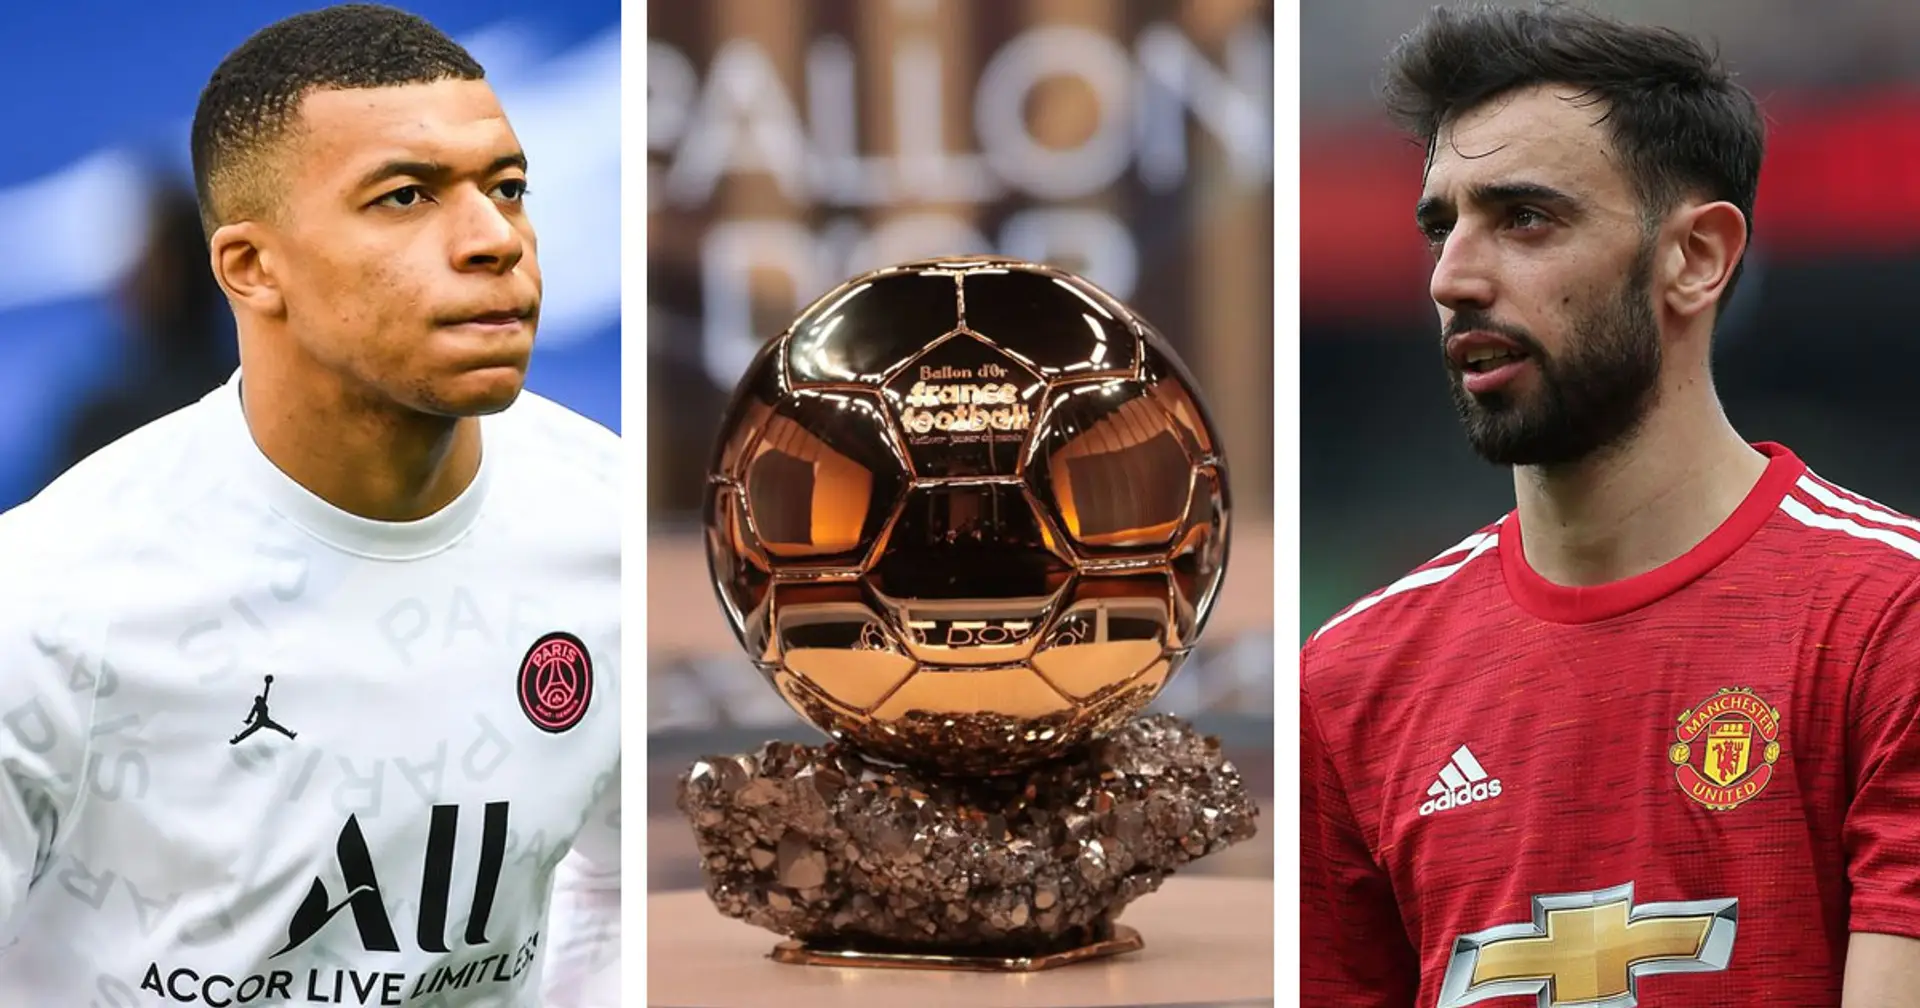 Ballon d'Or power rankings: Bruno keeps place in top 10, Mbappe jumps to top spot